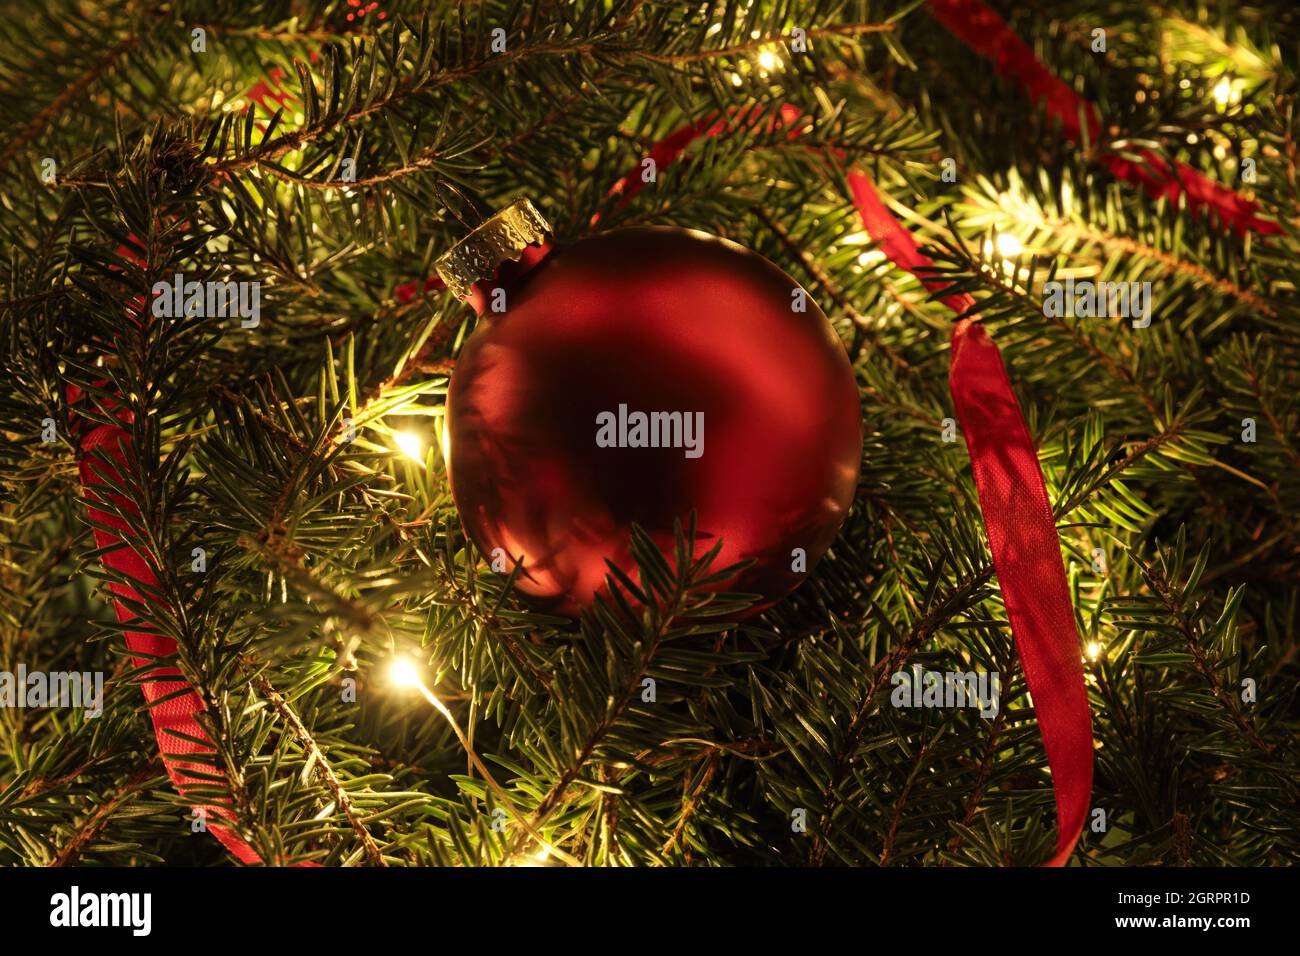 Red Glass Ball, Ribbon, Glowing Garland and Spruce Branches. Festive Decorations for Christmas and New Year. Stock Photo